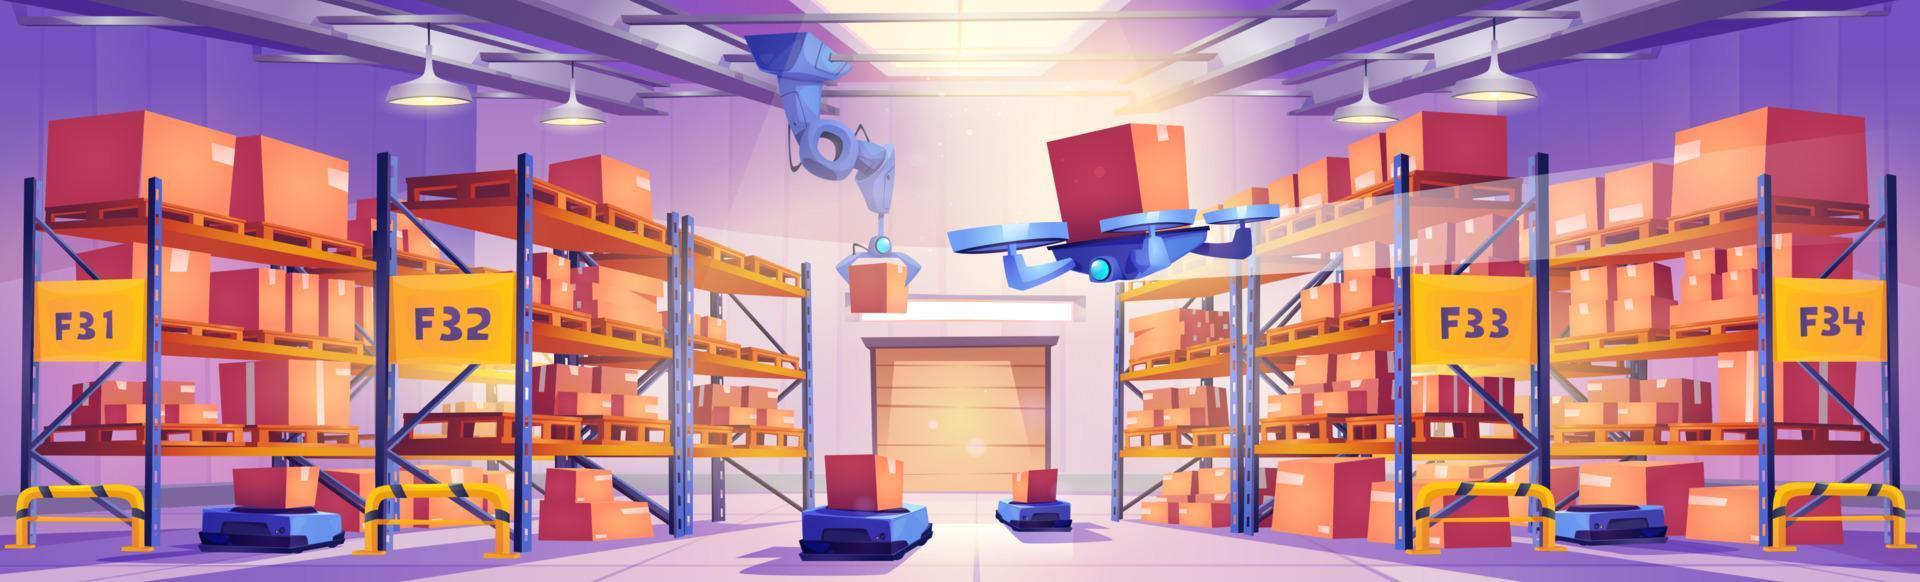 Robots in warehouse interior, automated machines vector